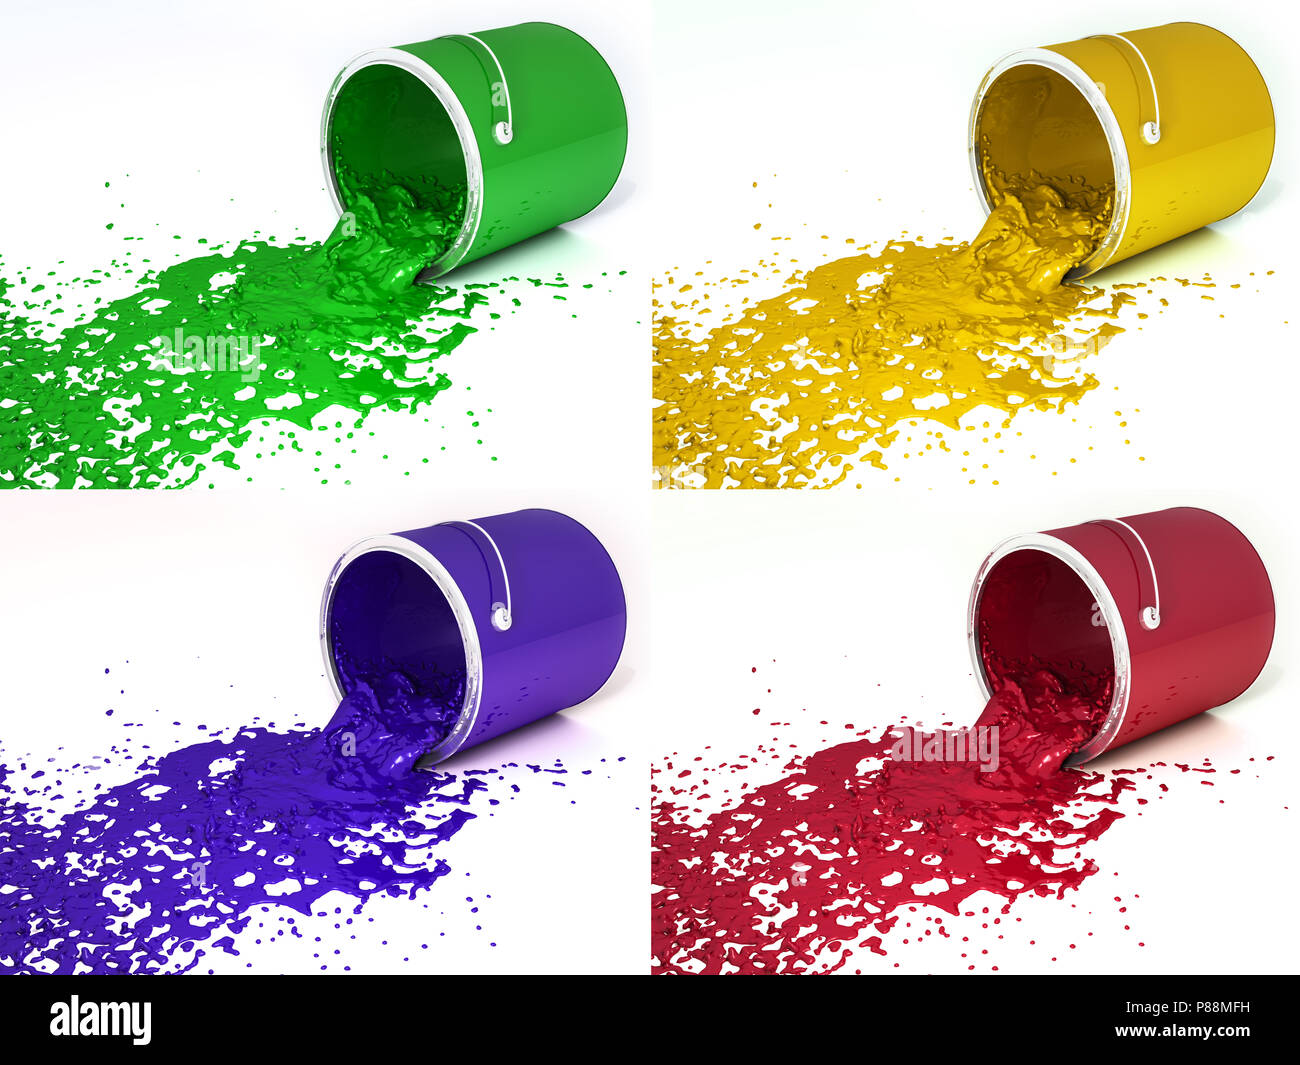 collection of four buckets of paint upside down on the white background. Stock Photo